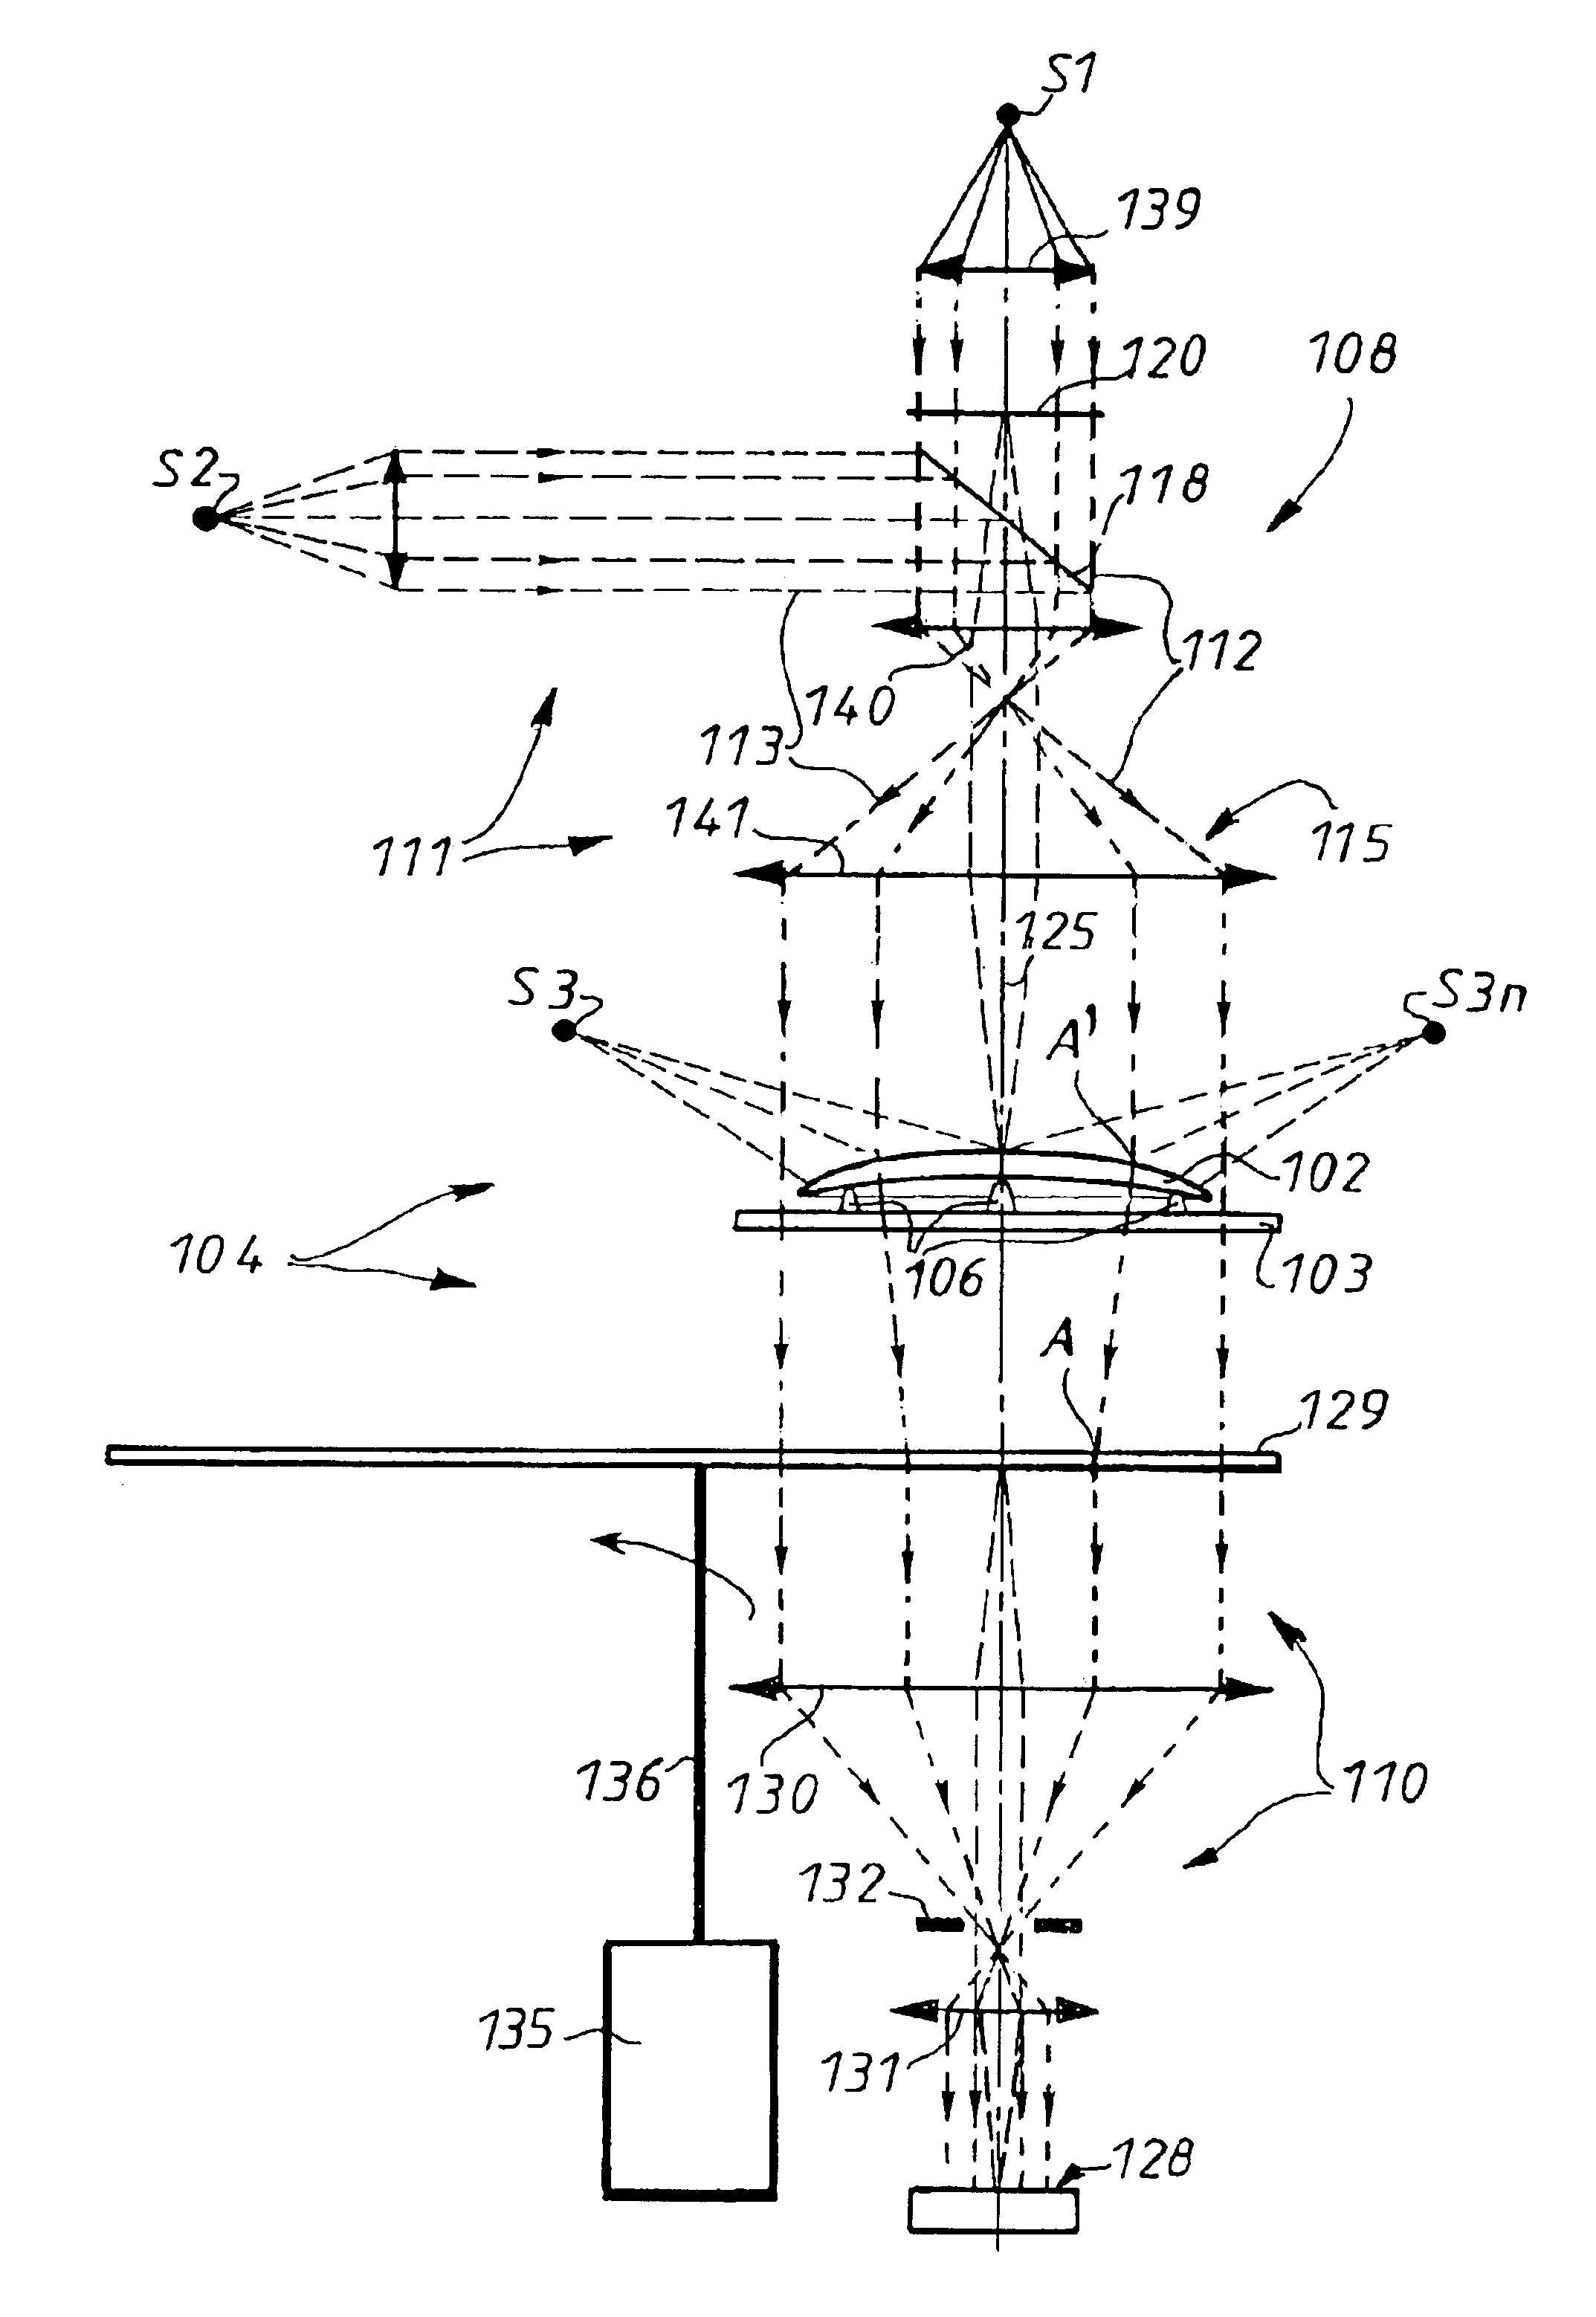 Device for automatically detecting characteristics of an ophthalmic lens and an automatic device for fitting a centering and drive peg incorporating it